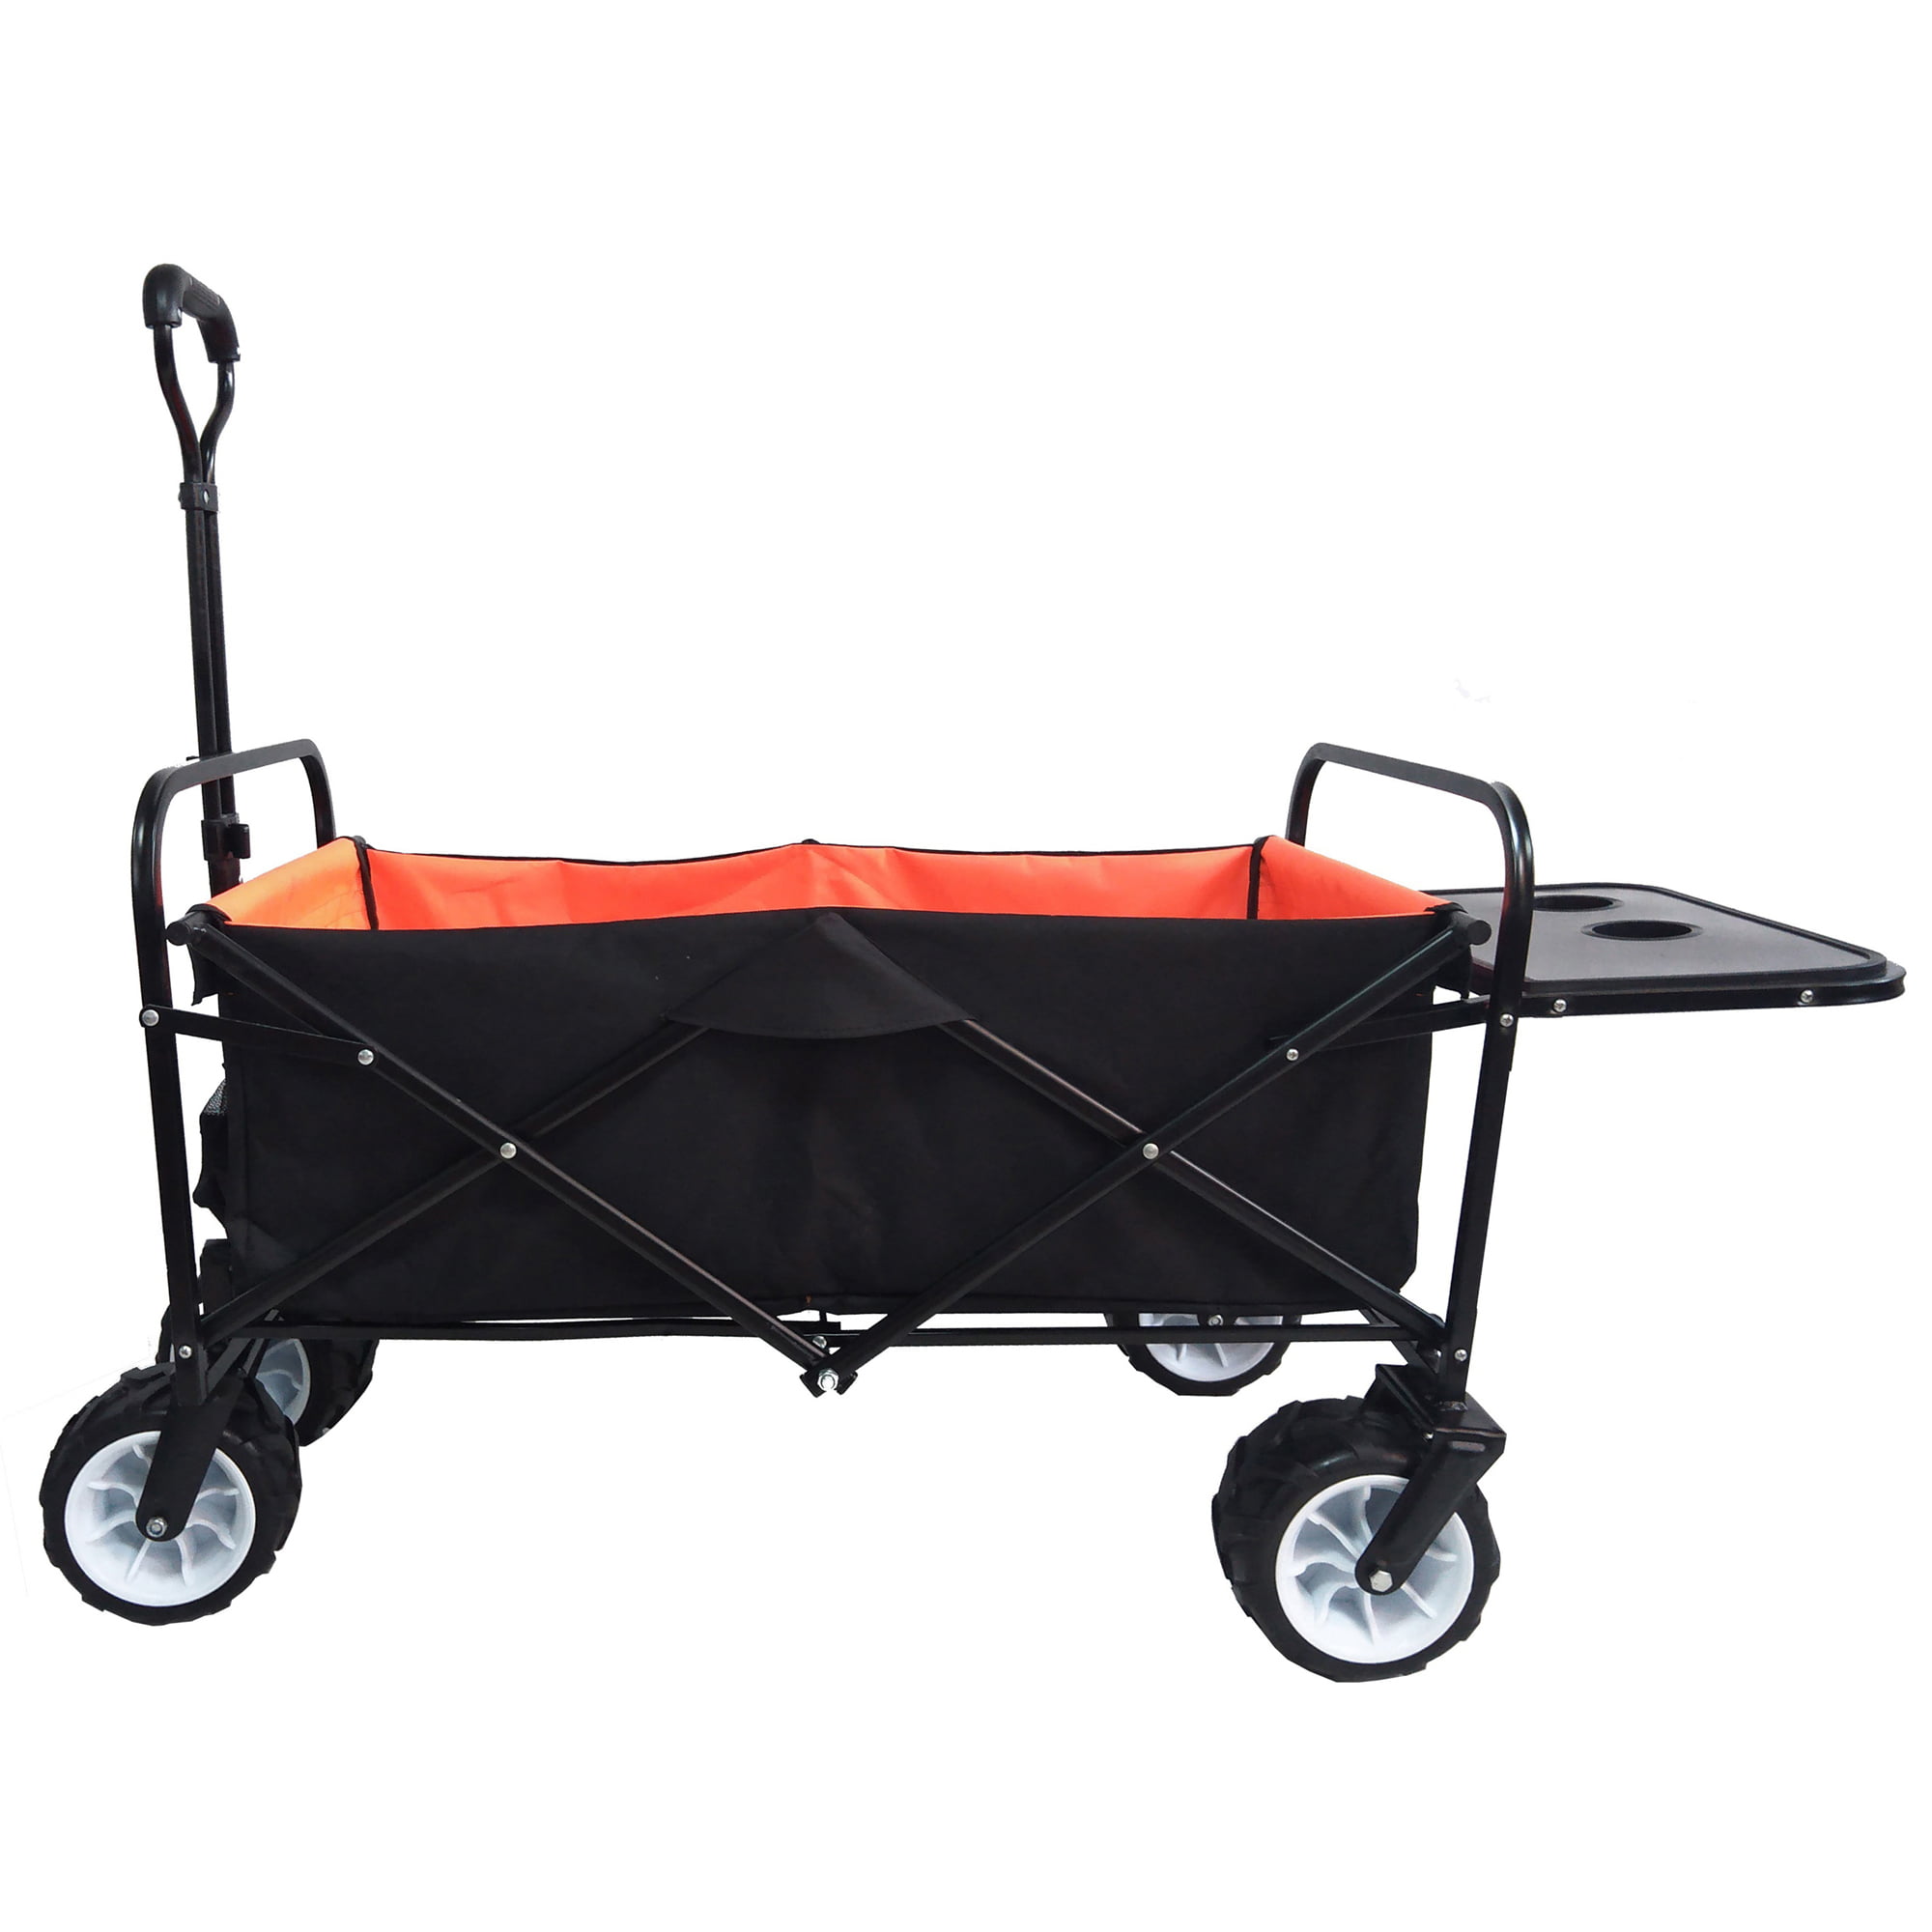 All Terrain Air Tires Beach Cart with Folding Desk Mesh Pouches for Camping Shopping Picnic One opening Outdoor Garden Folding Wagon with Handle